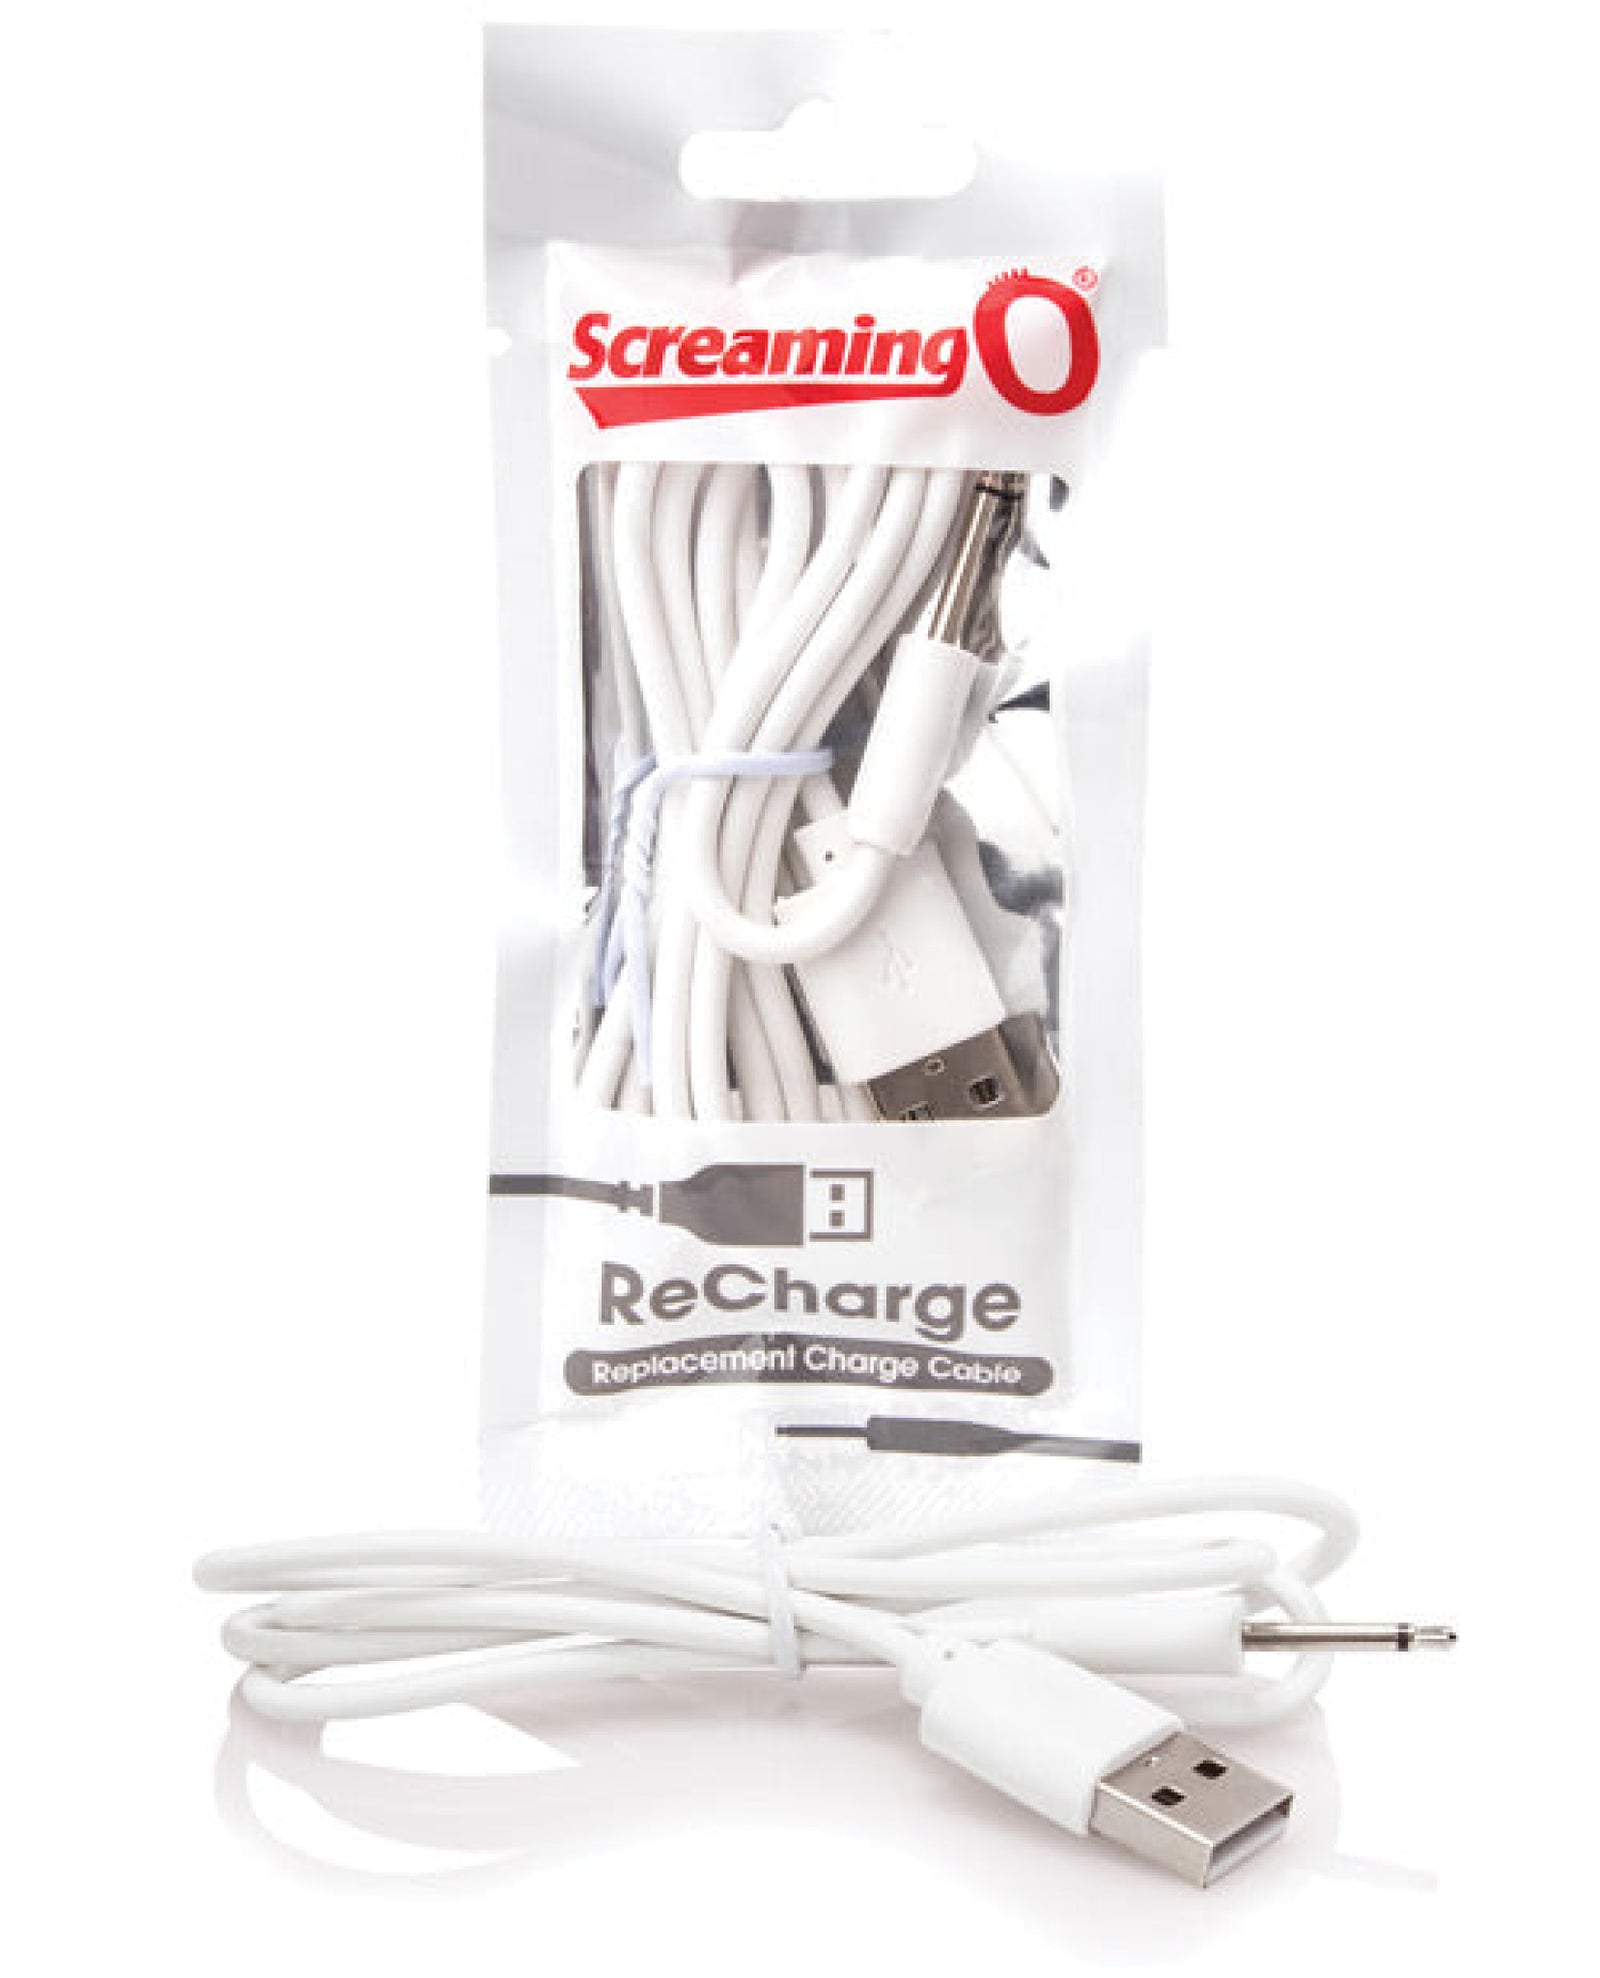 Screaming O Recharge Charging Cable - White Screaming O